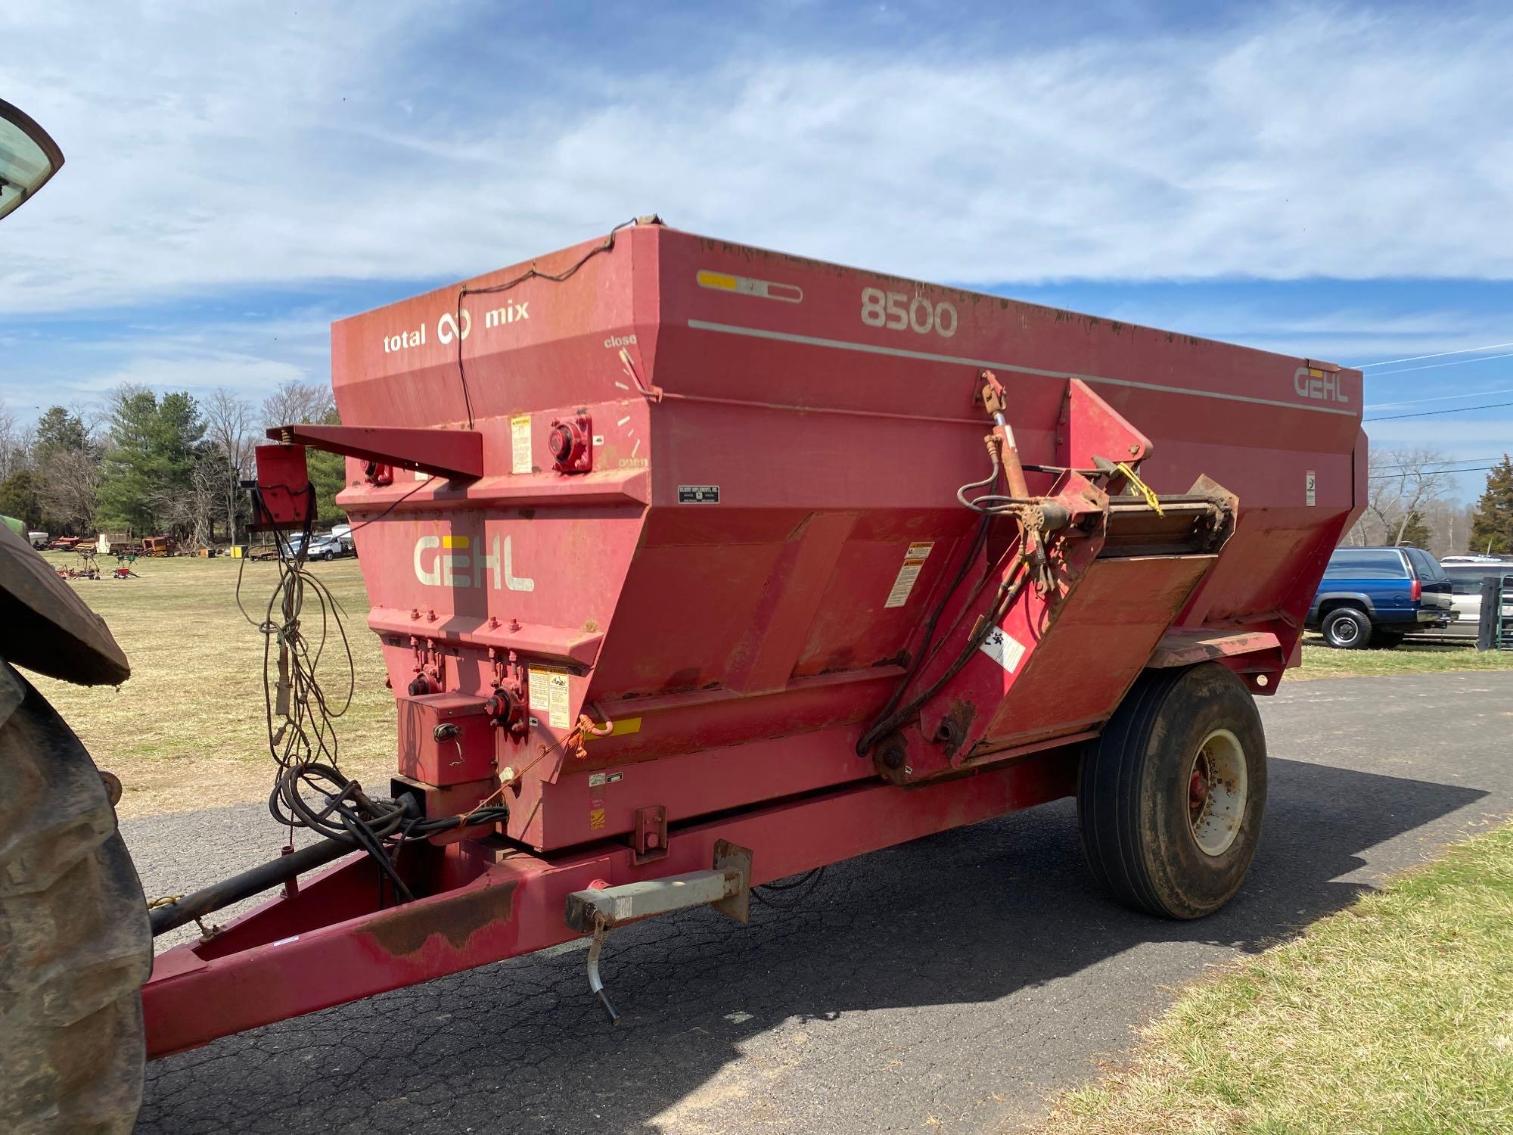 Image for Gehl 8500 Auger Mixer Feed Cart Per Seller Shed Kept Ready to Go to Work, Needs Scale Heads,1 Owner 